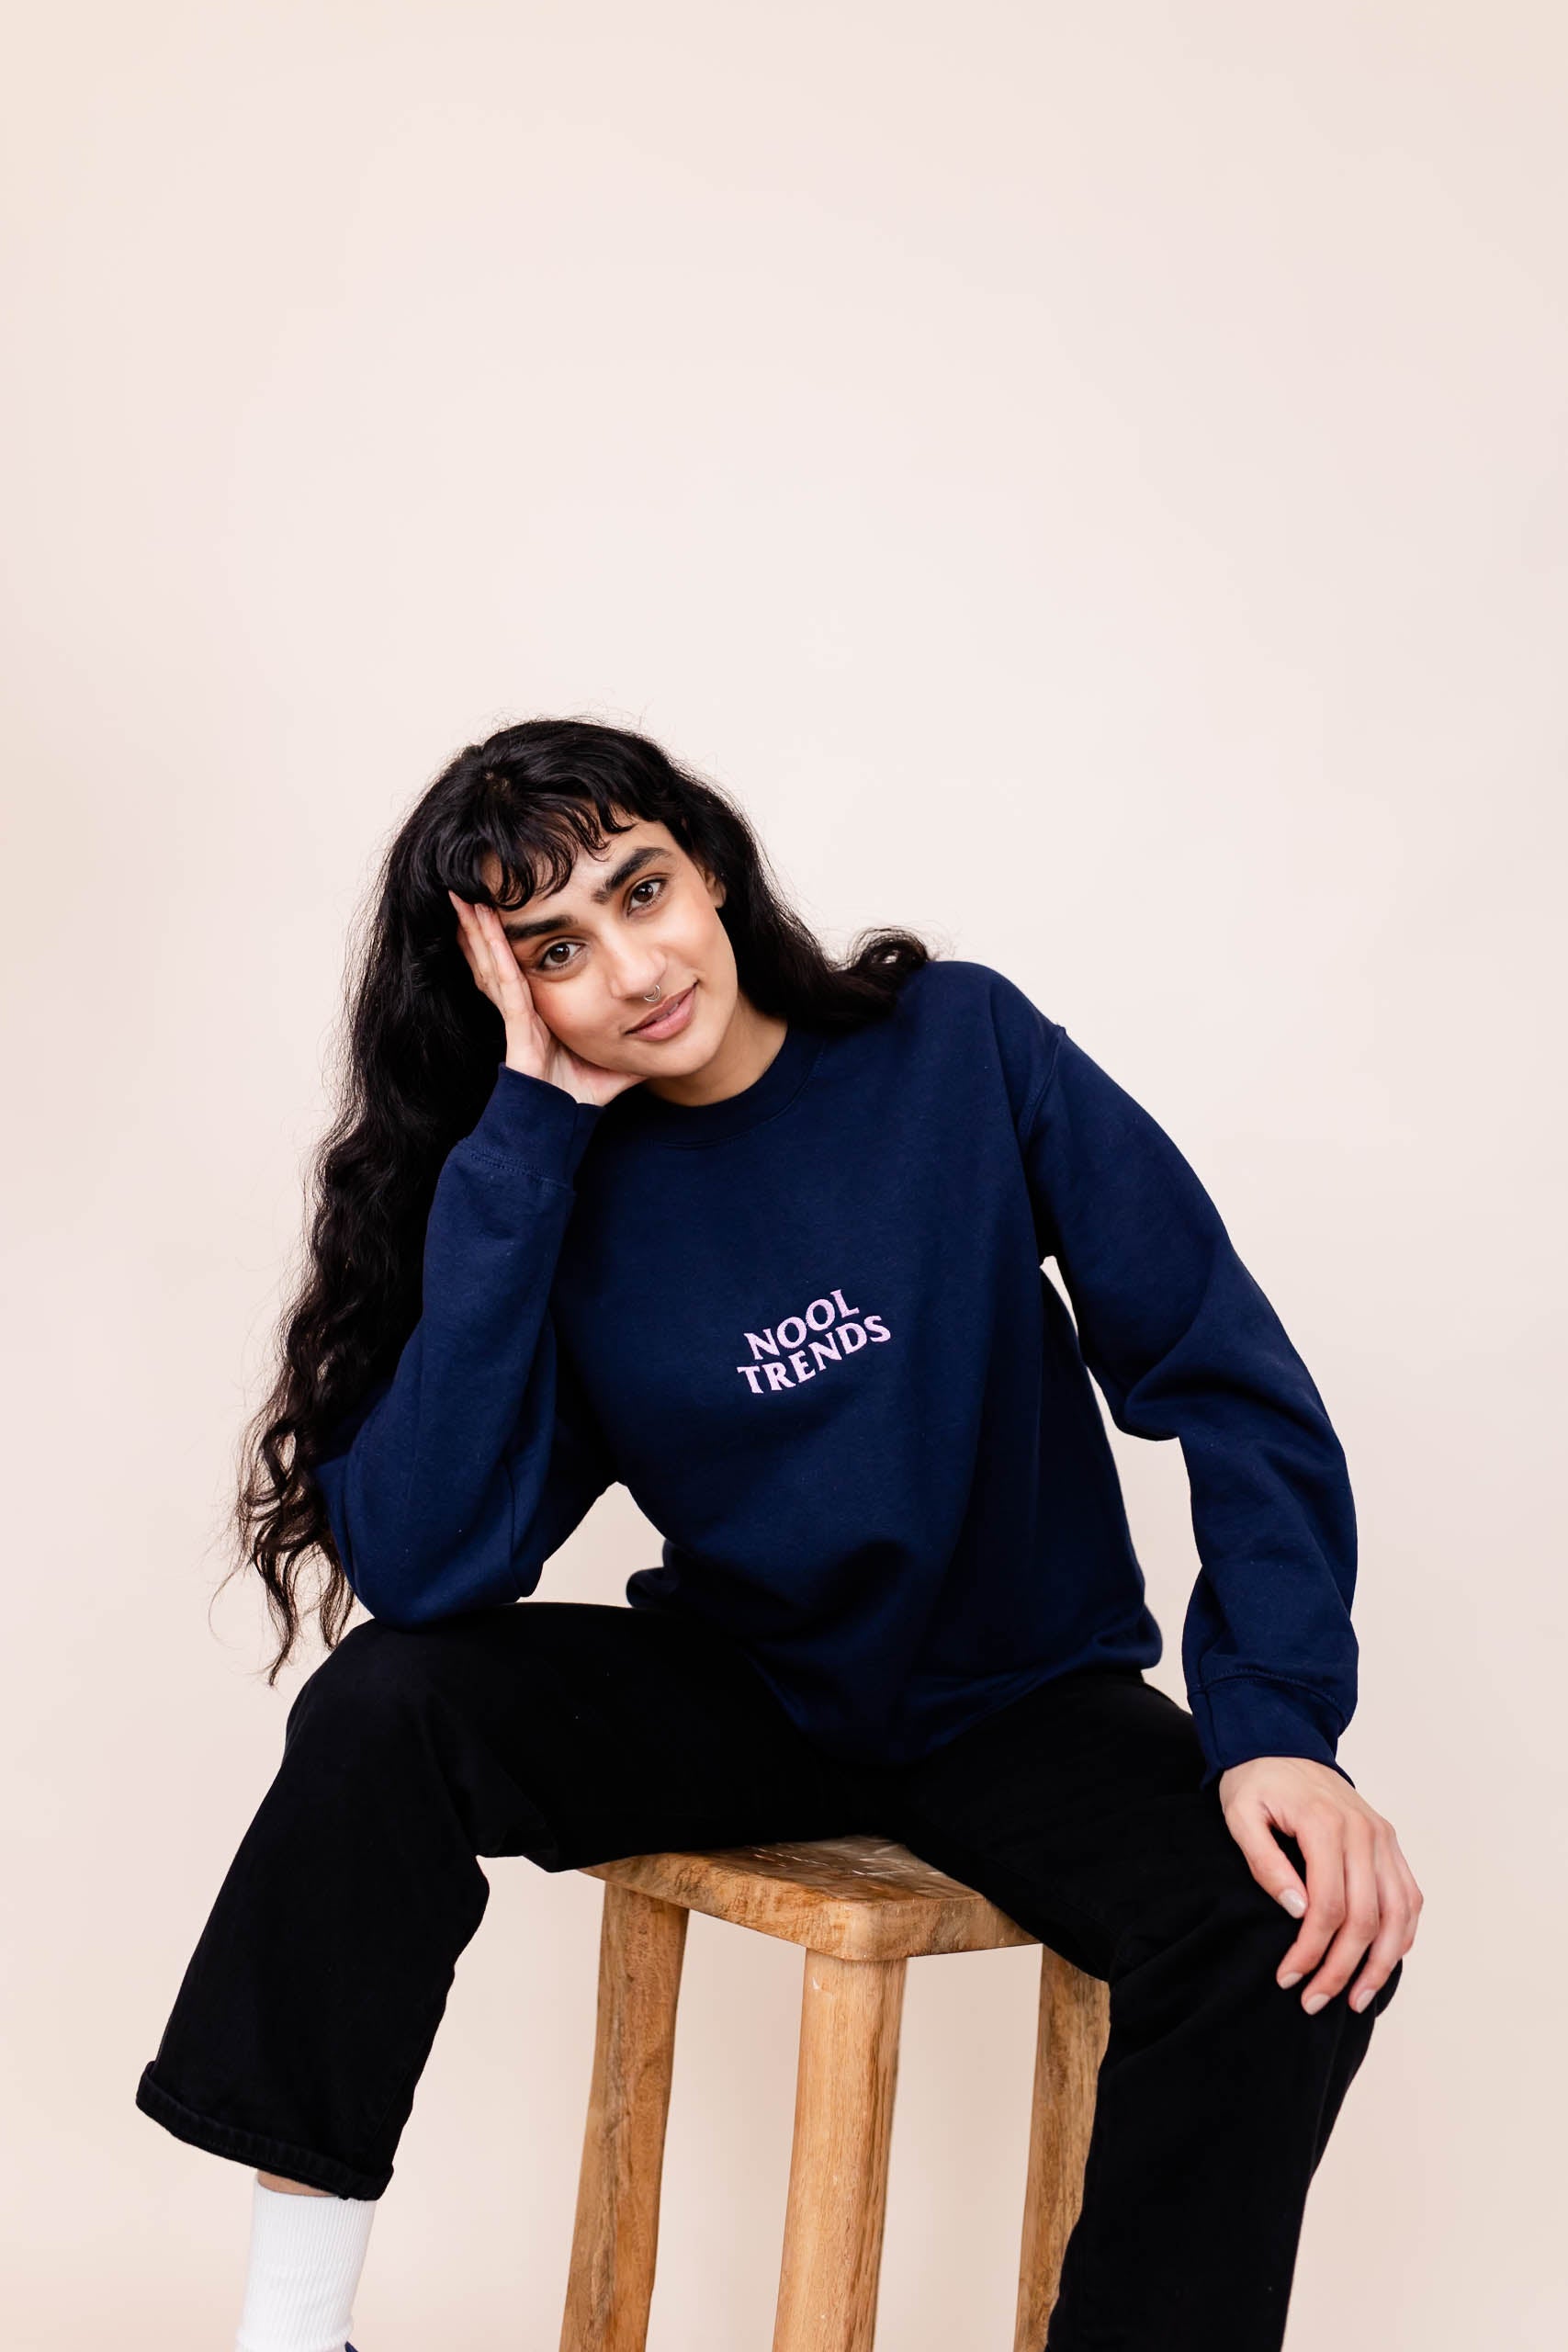 Nooltrends Sweatshirt | Navy Blue - Premium  from NOOLTRENDS - Just £42.99! Shop now at NOOLTRENDS